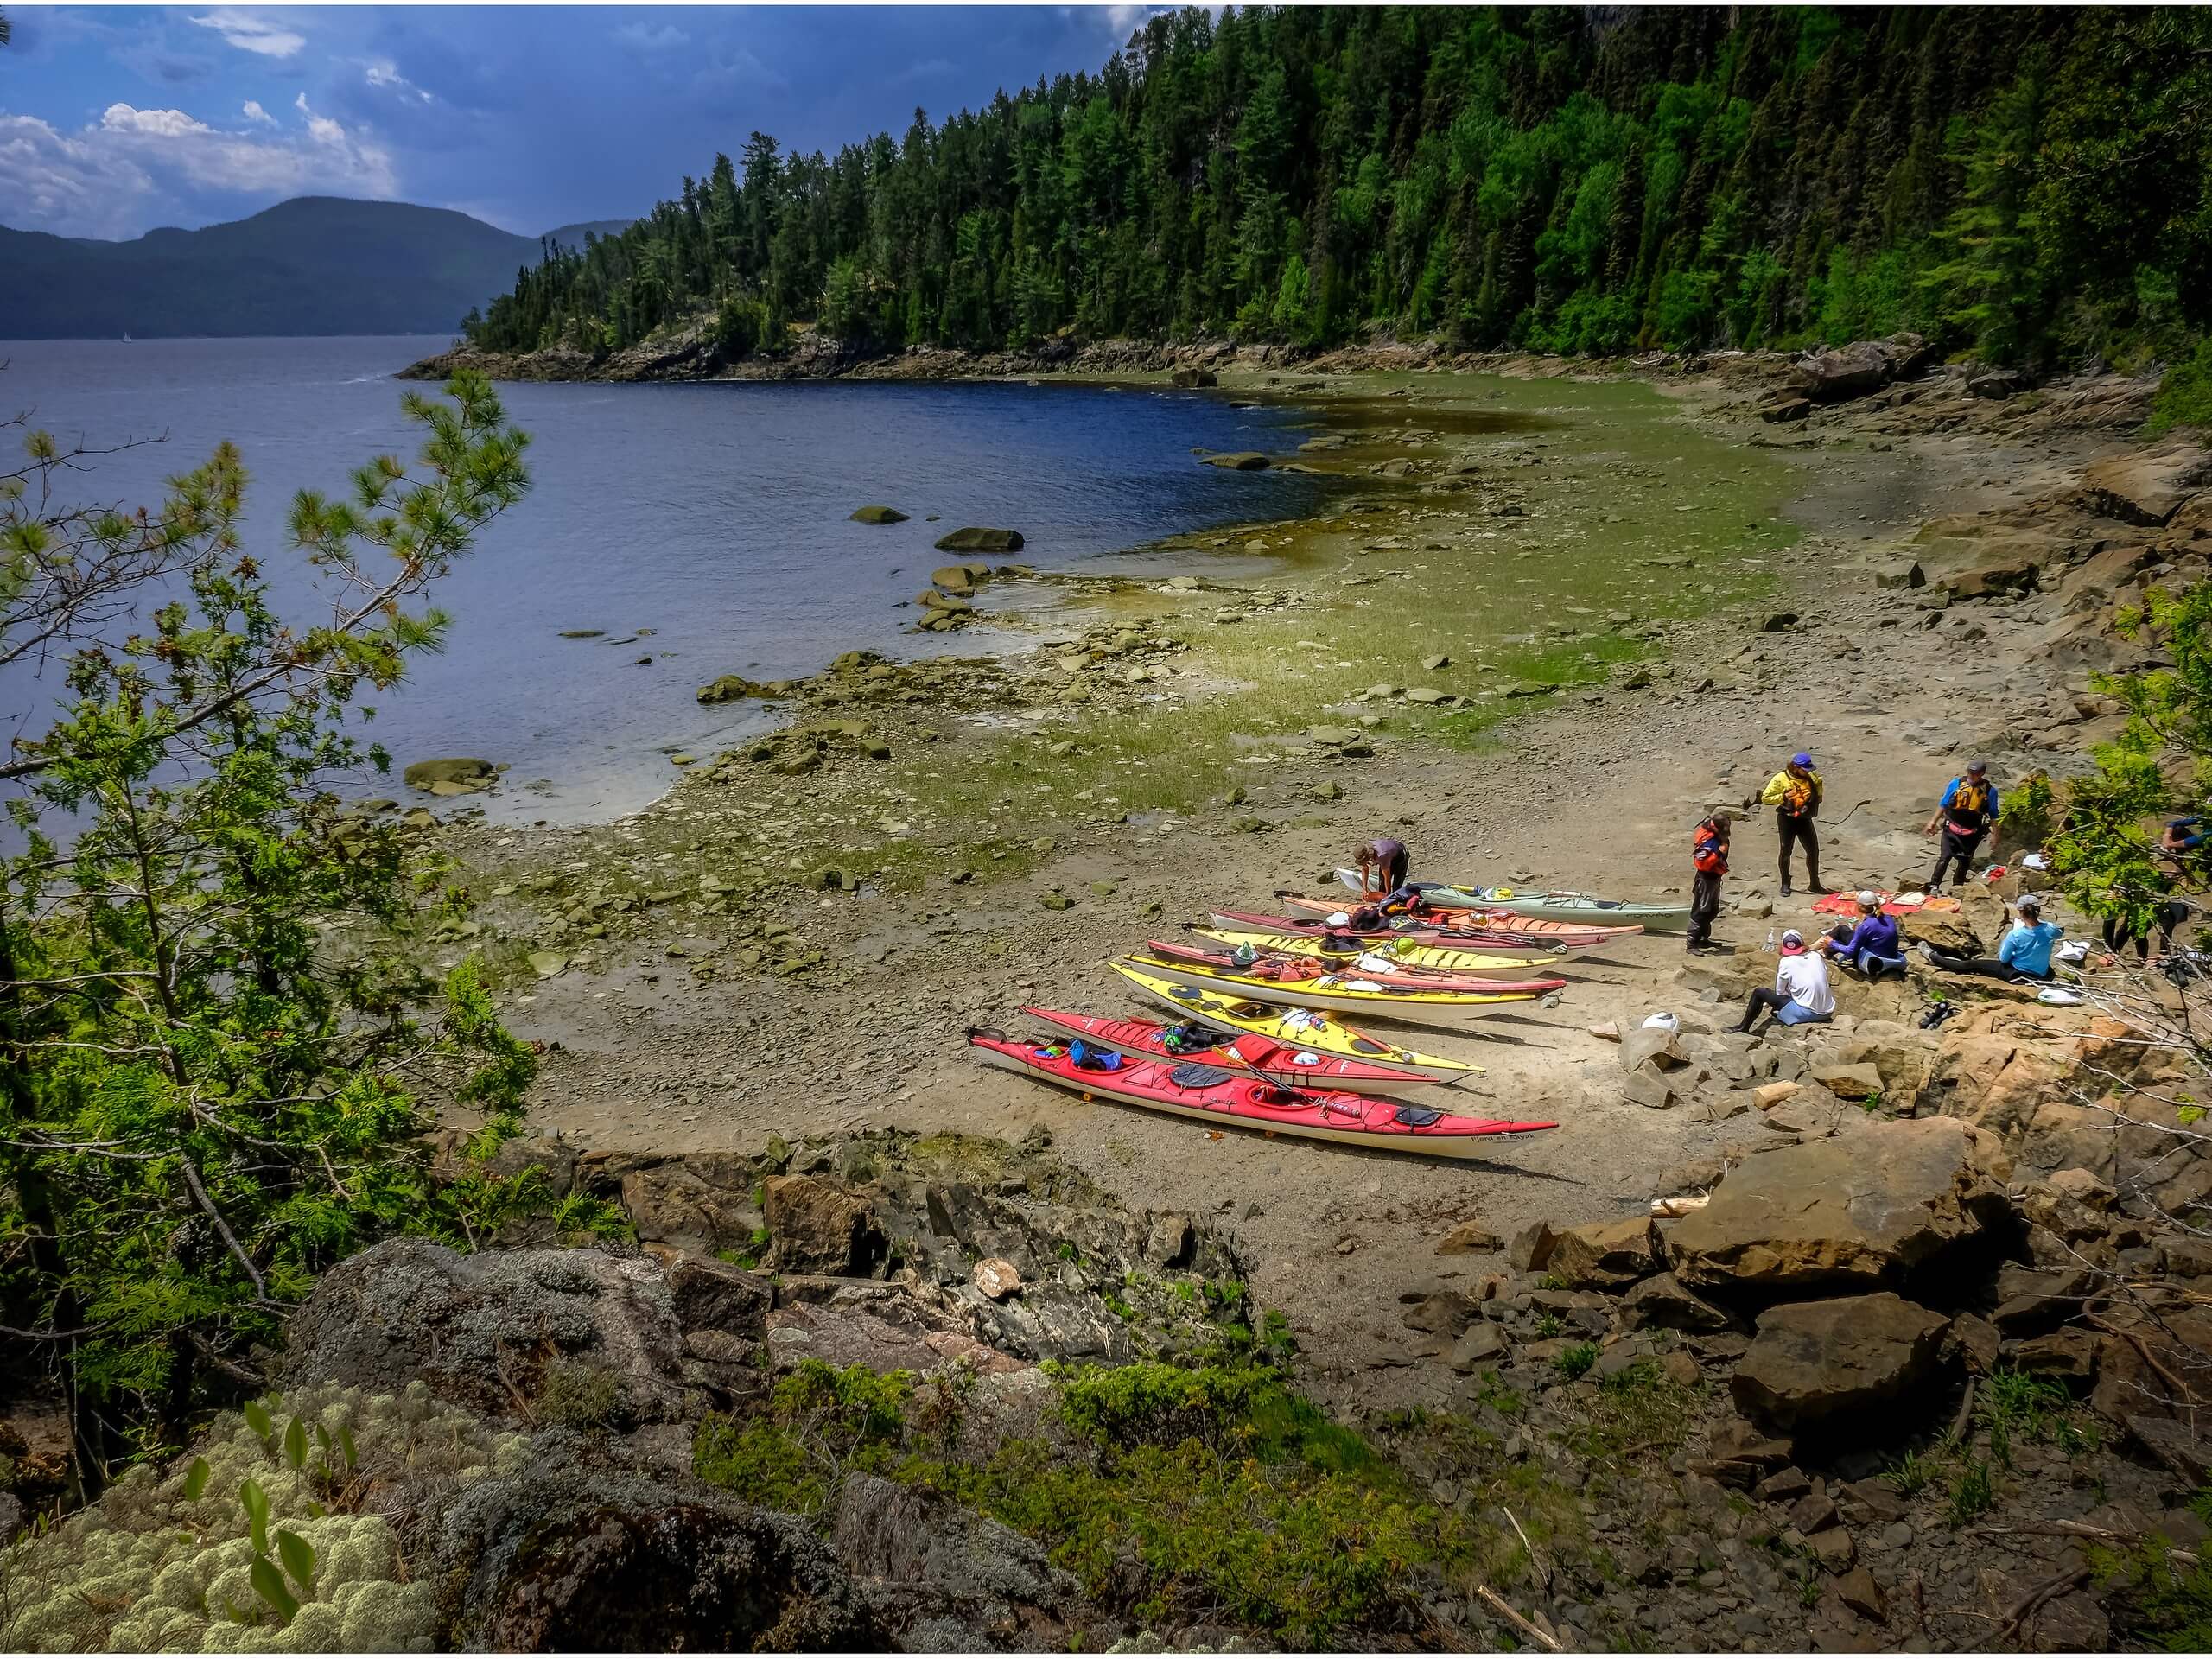 Kayaks on the shore, Quebec